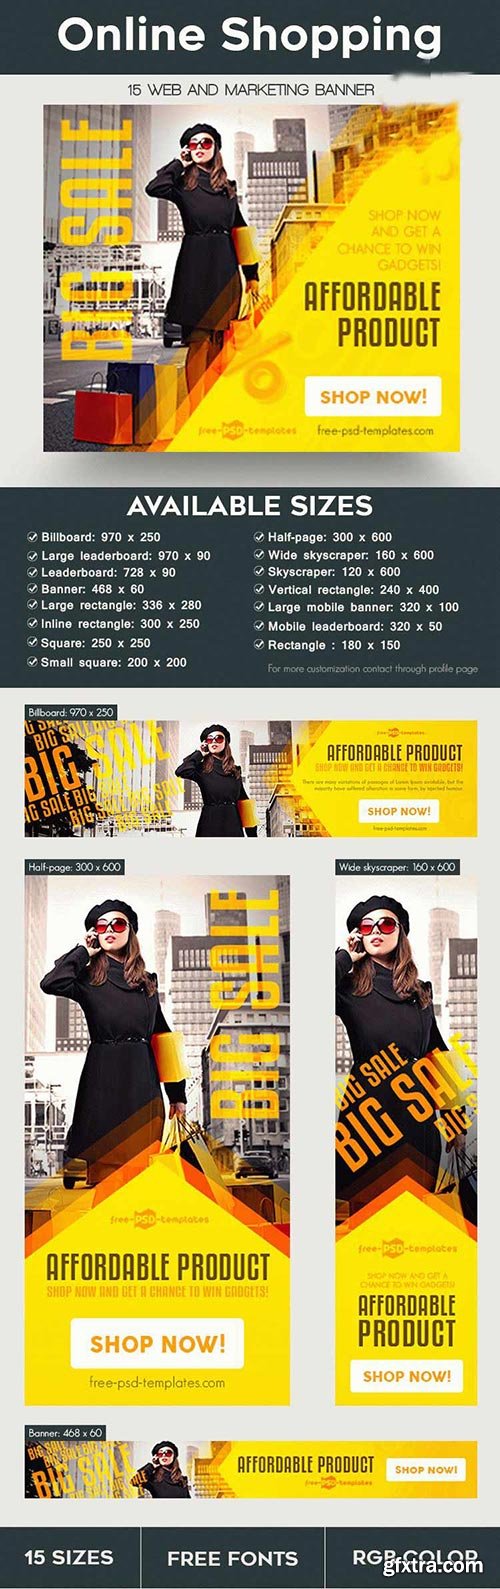 Online Shopping Banner in PSD Template